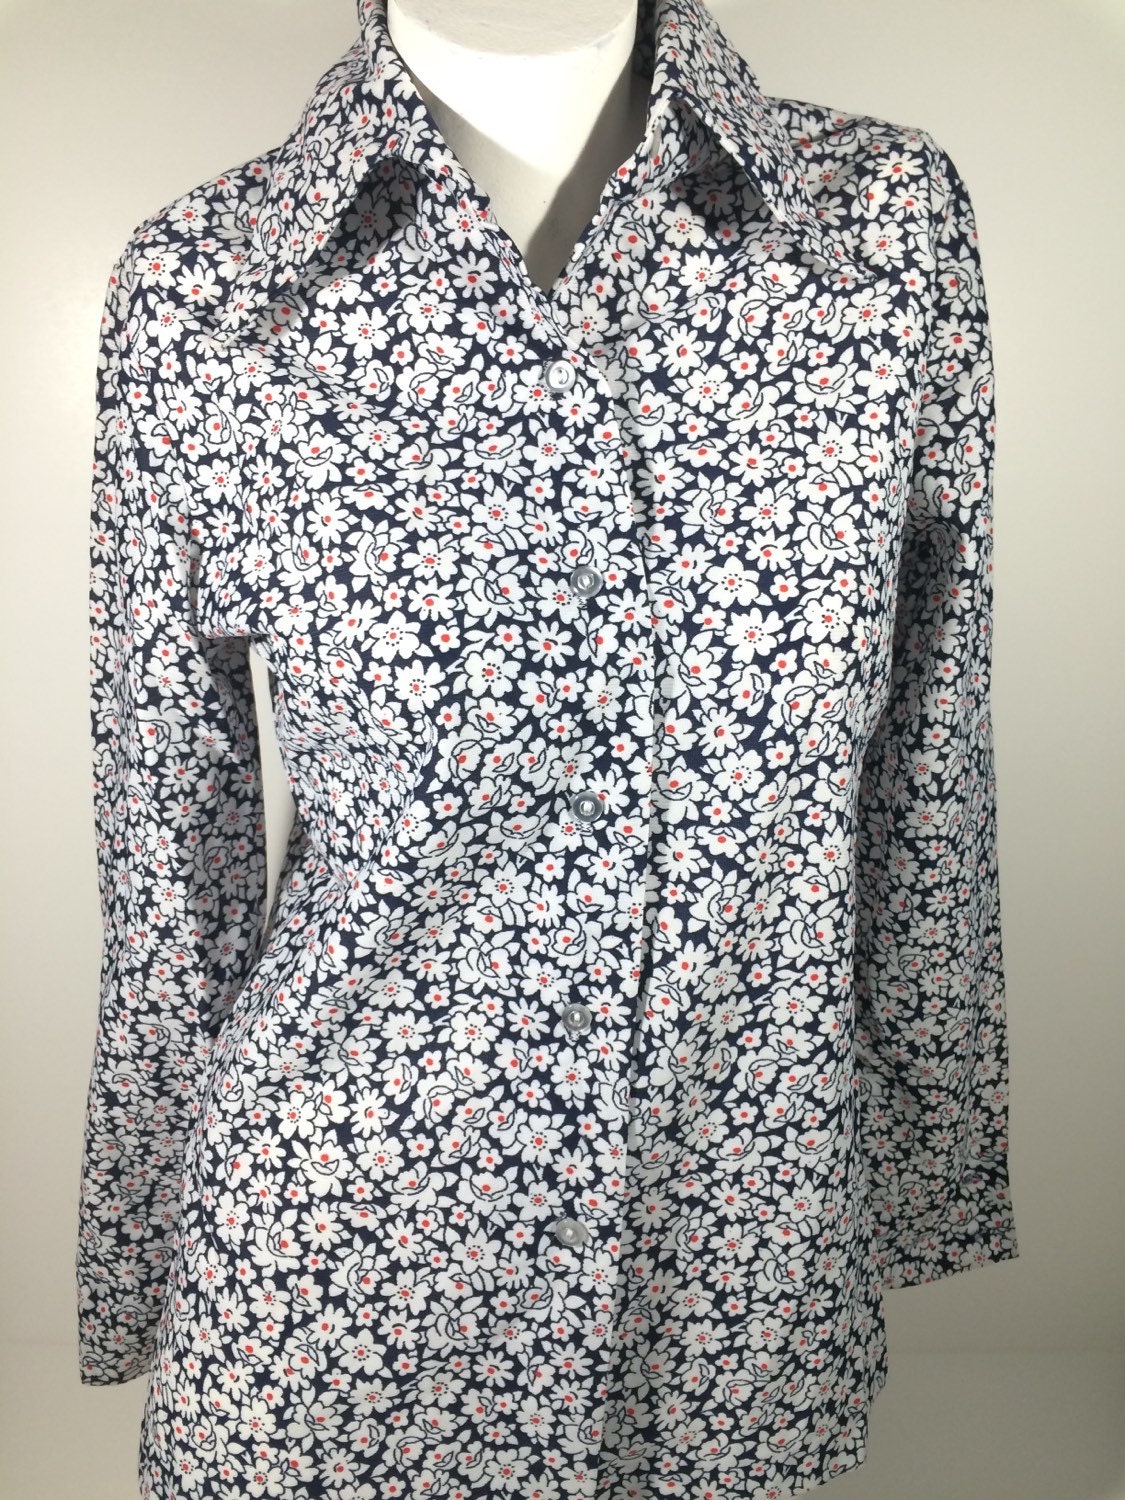 Retro Vintage 1970's butterfly-collar woman's shirt | Etsy